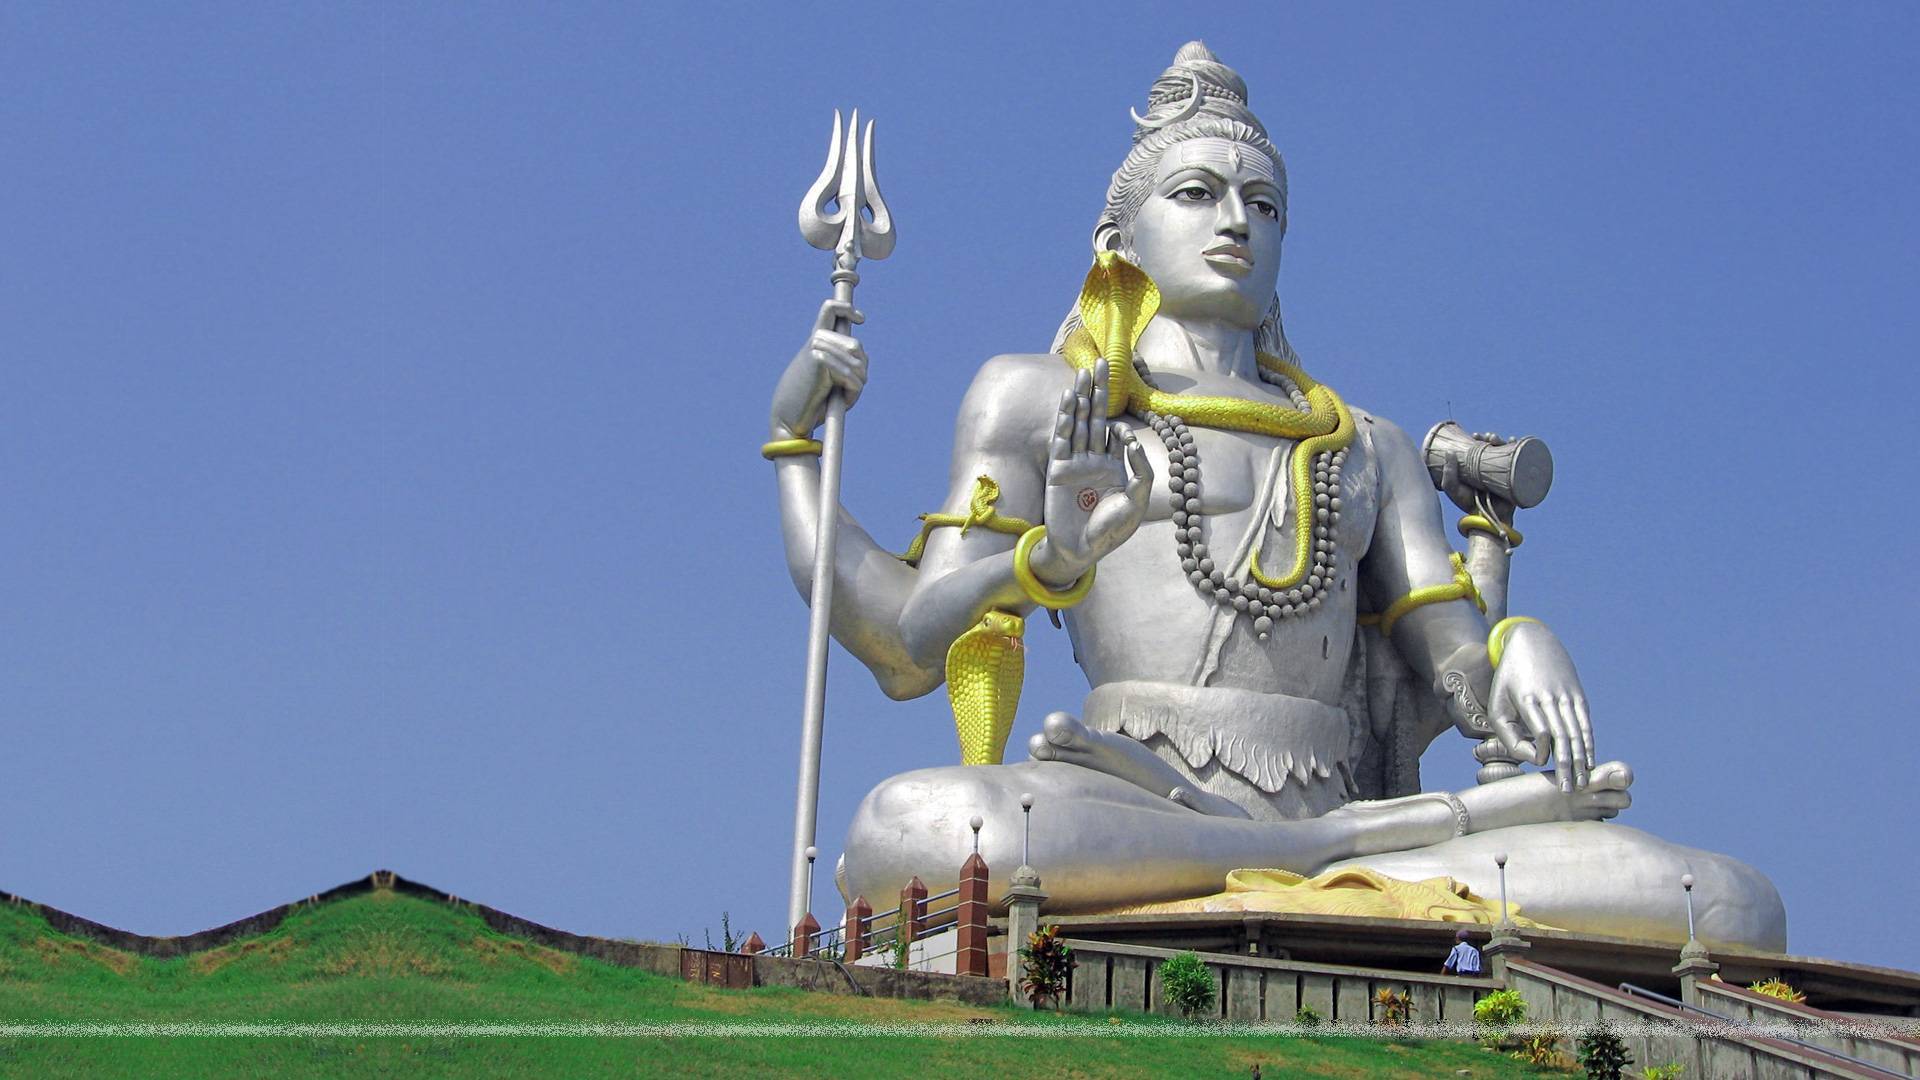 1920x1080 Lord Shiva Lord Shiva Hd Wallpapers For Laptop